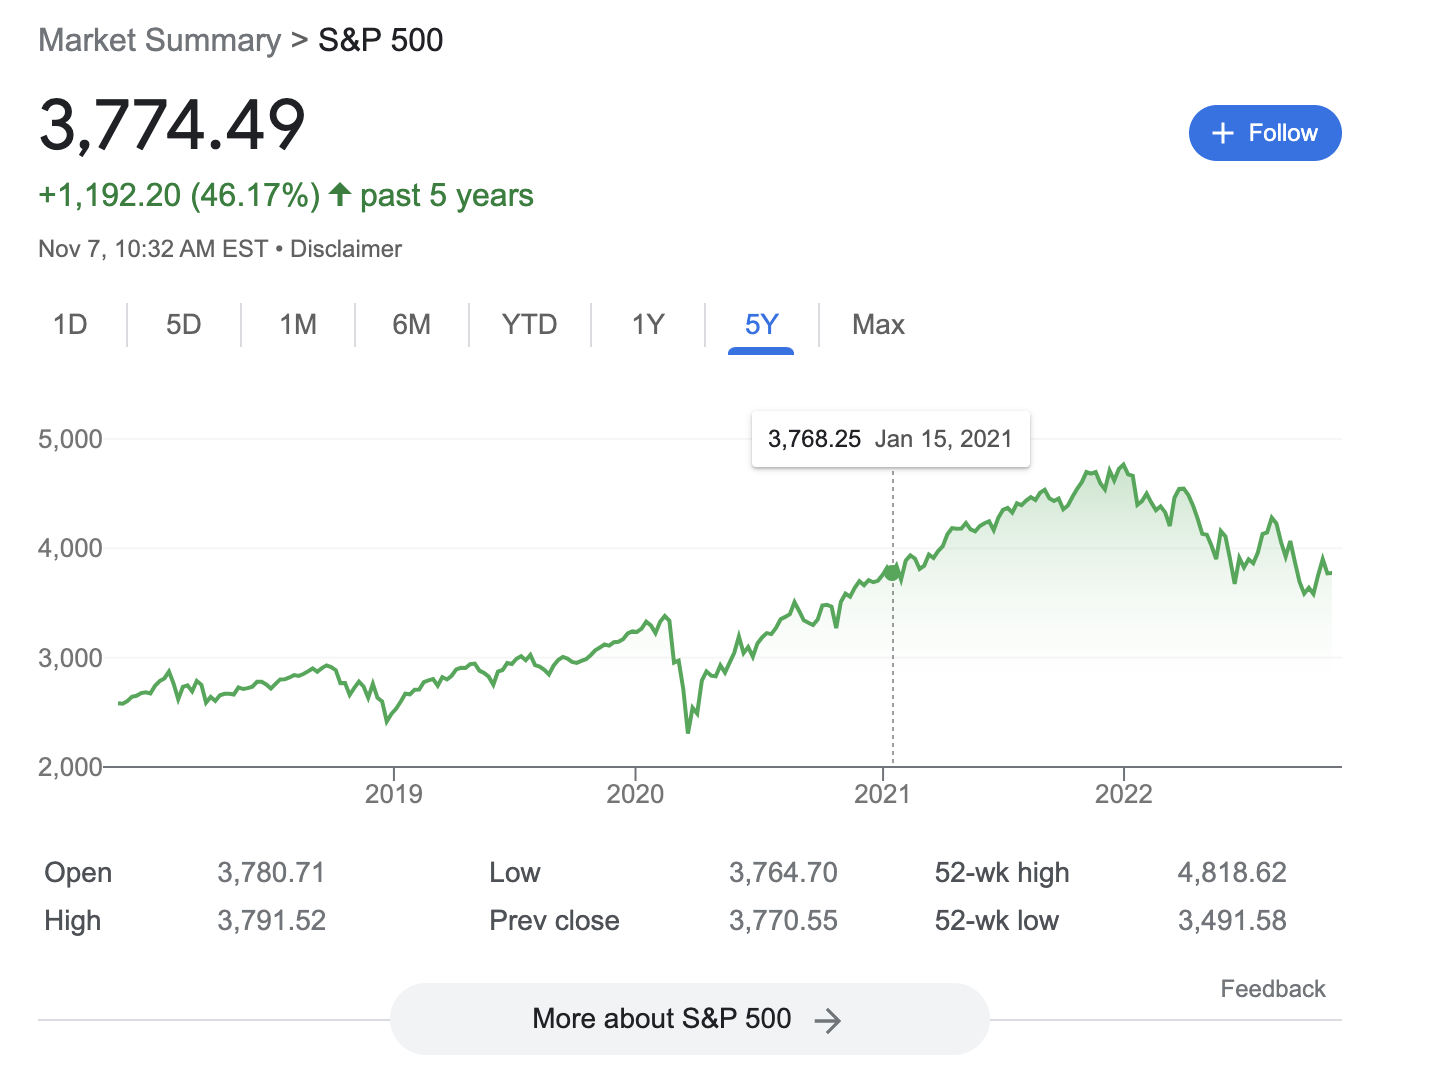 The stock market, as measured by the S&P 500, has come back down from all-time highs. But at the valuation shown in the chart above, it has returned to where it was a little more than a year earlier. More importantly, it's still up significantly over the charted five-year period.